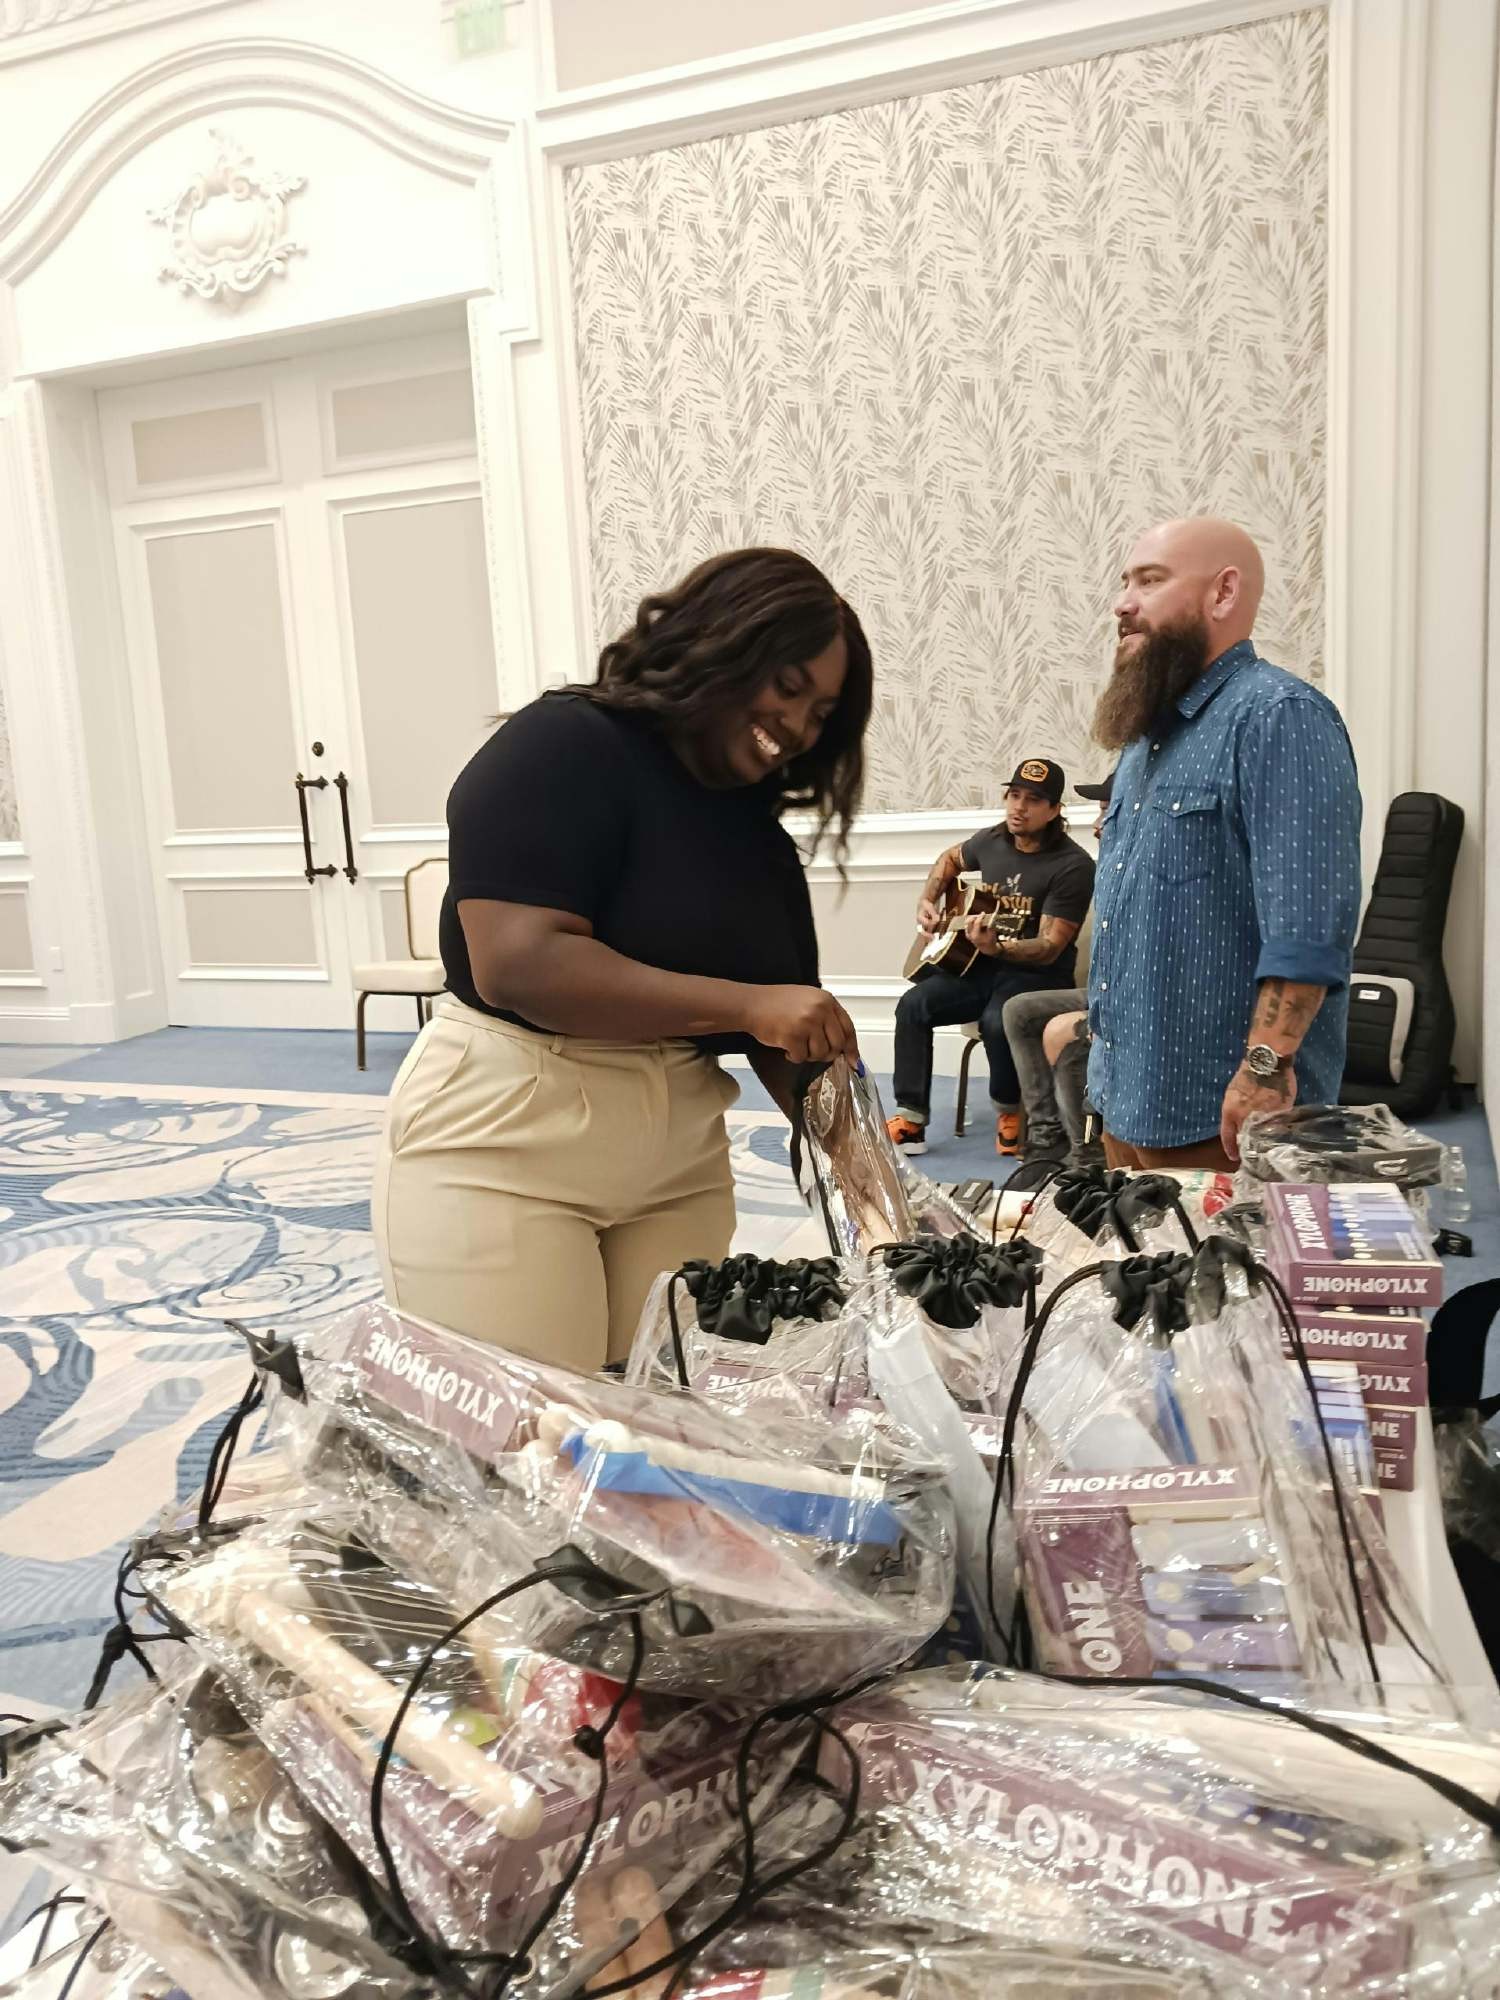 Our team member assembling music instrument kits for a local charity in our South Florida market.